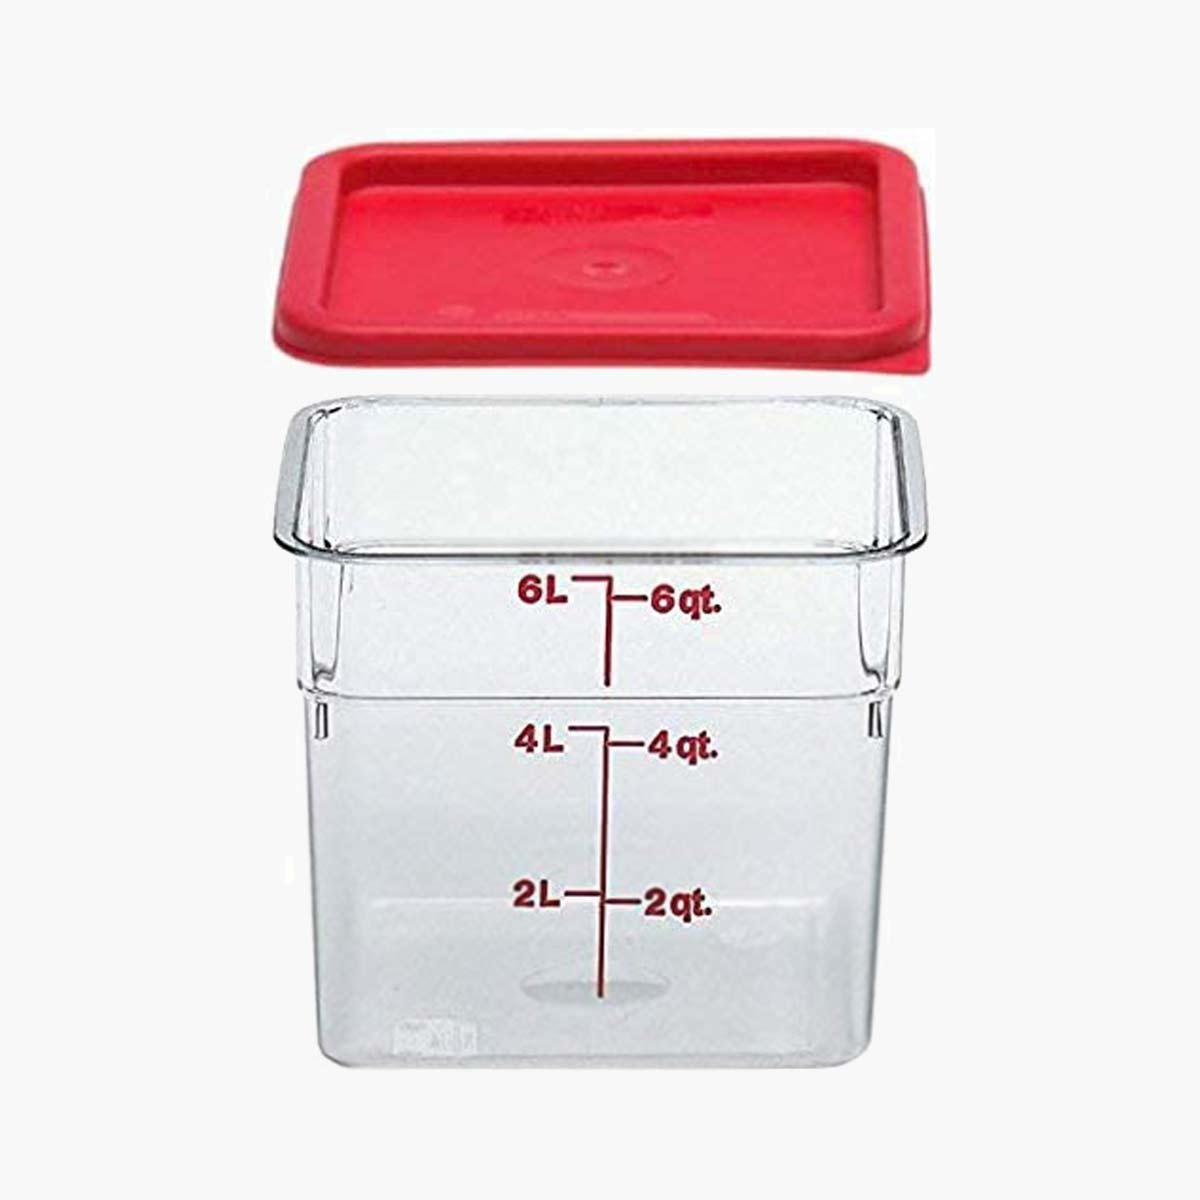 A Cambro dough container with red lid.